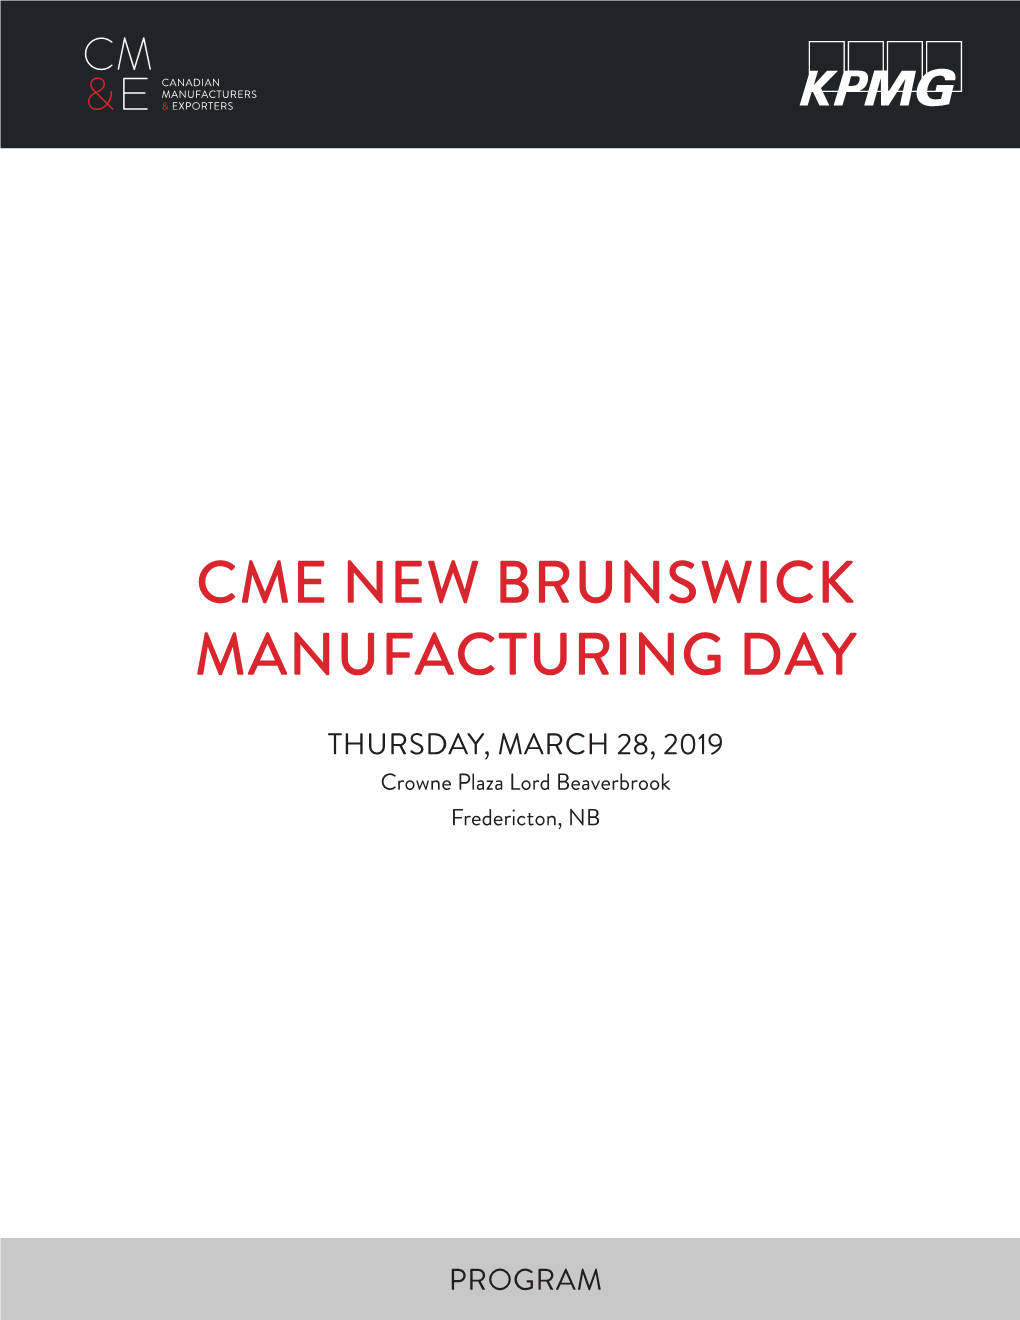 Cme New Brunswick Manufacturing Day